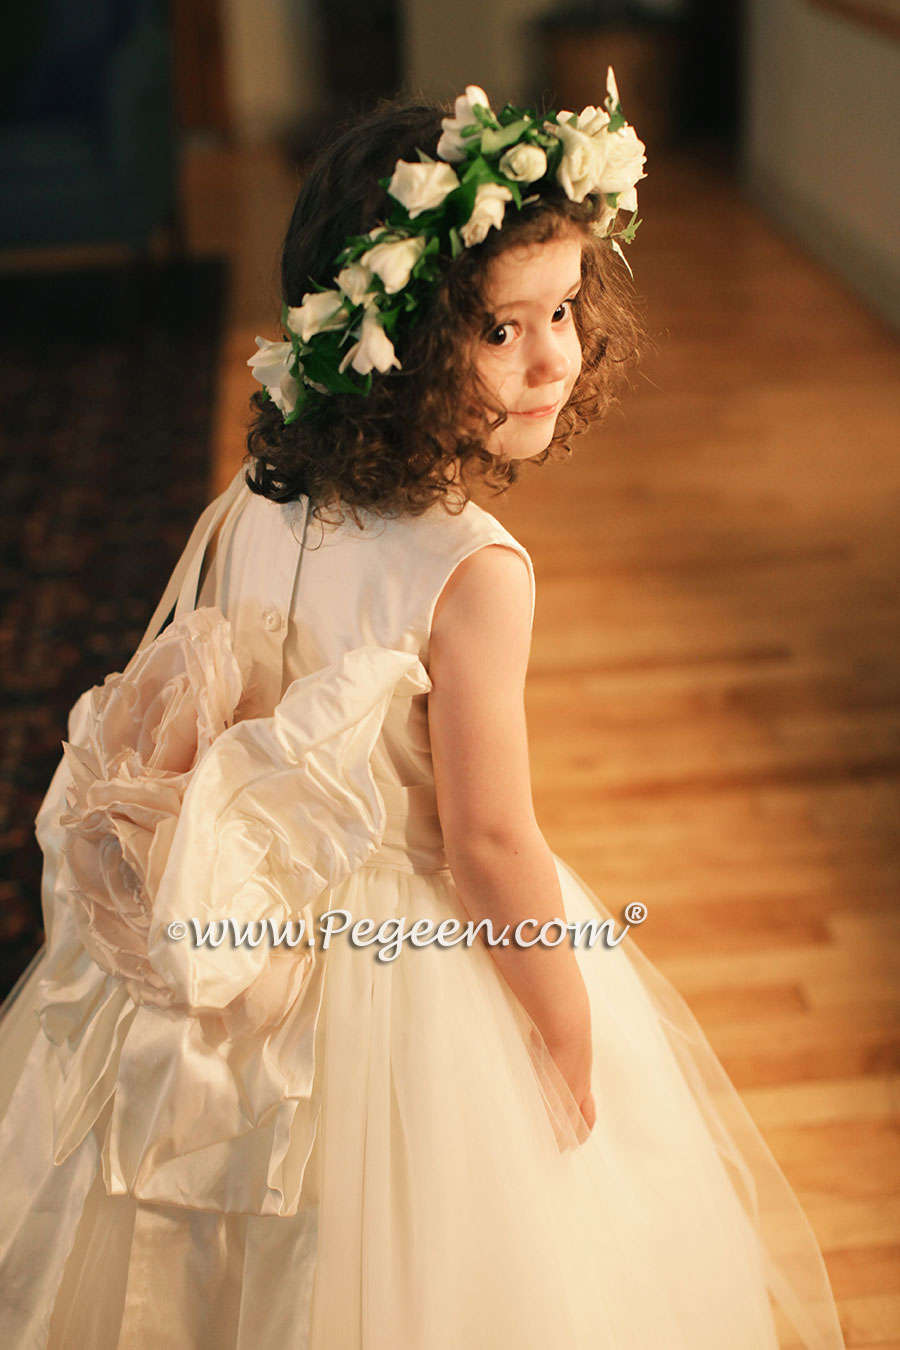 New Ivory Silk and Tulle Flower Girl Dress - Pegeen Style 402 with Signature Bustle